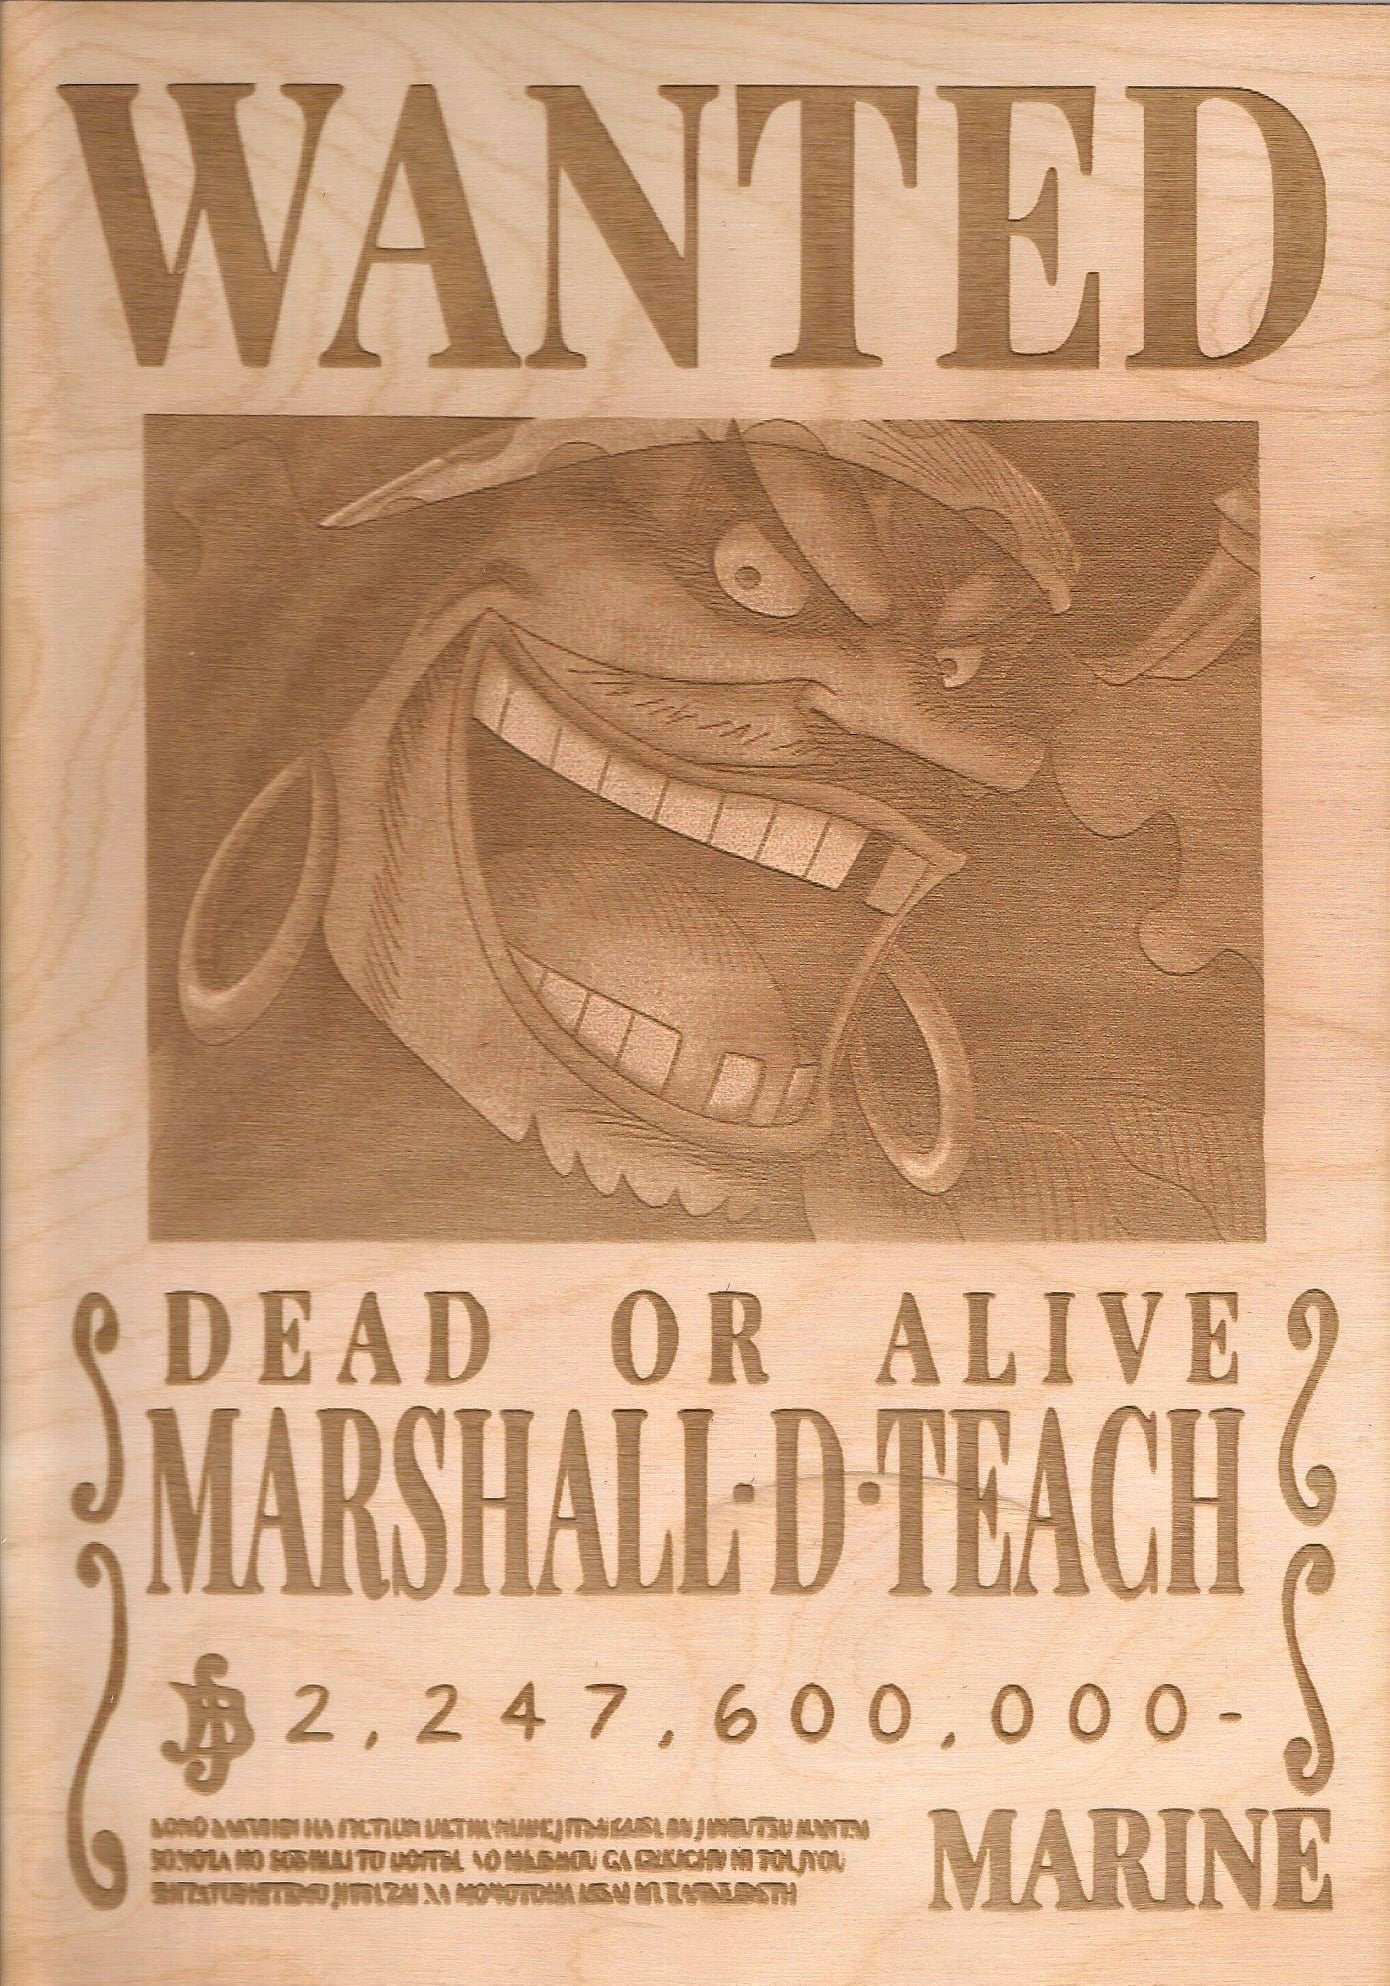 One Piece -Black Beard (Marshall D Teach) Wanted Poster - TantrumCollectibles.com